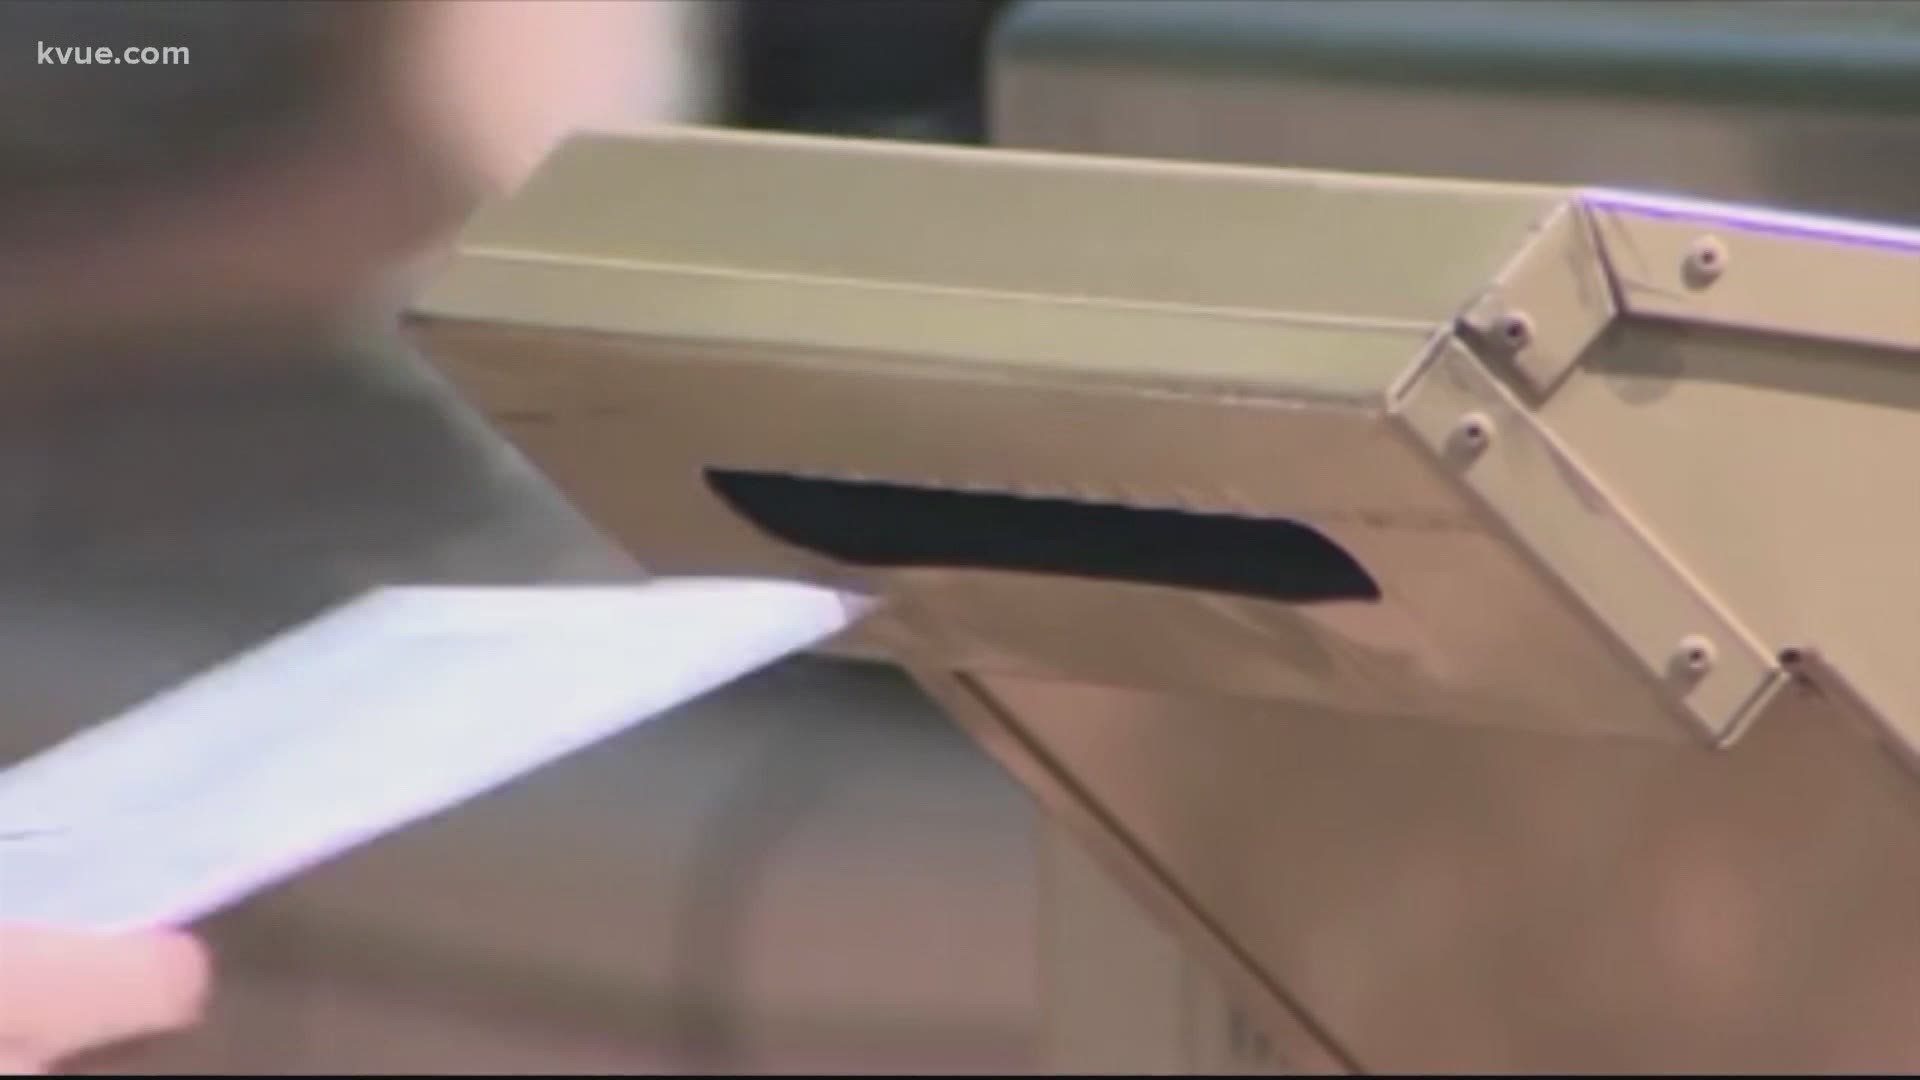 State lawmakers advanced several election-related bills Tuesday.